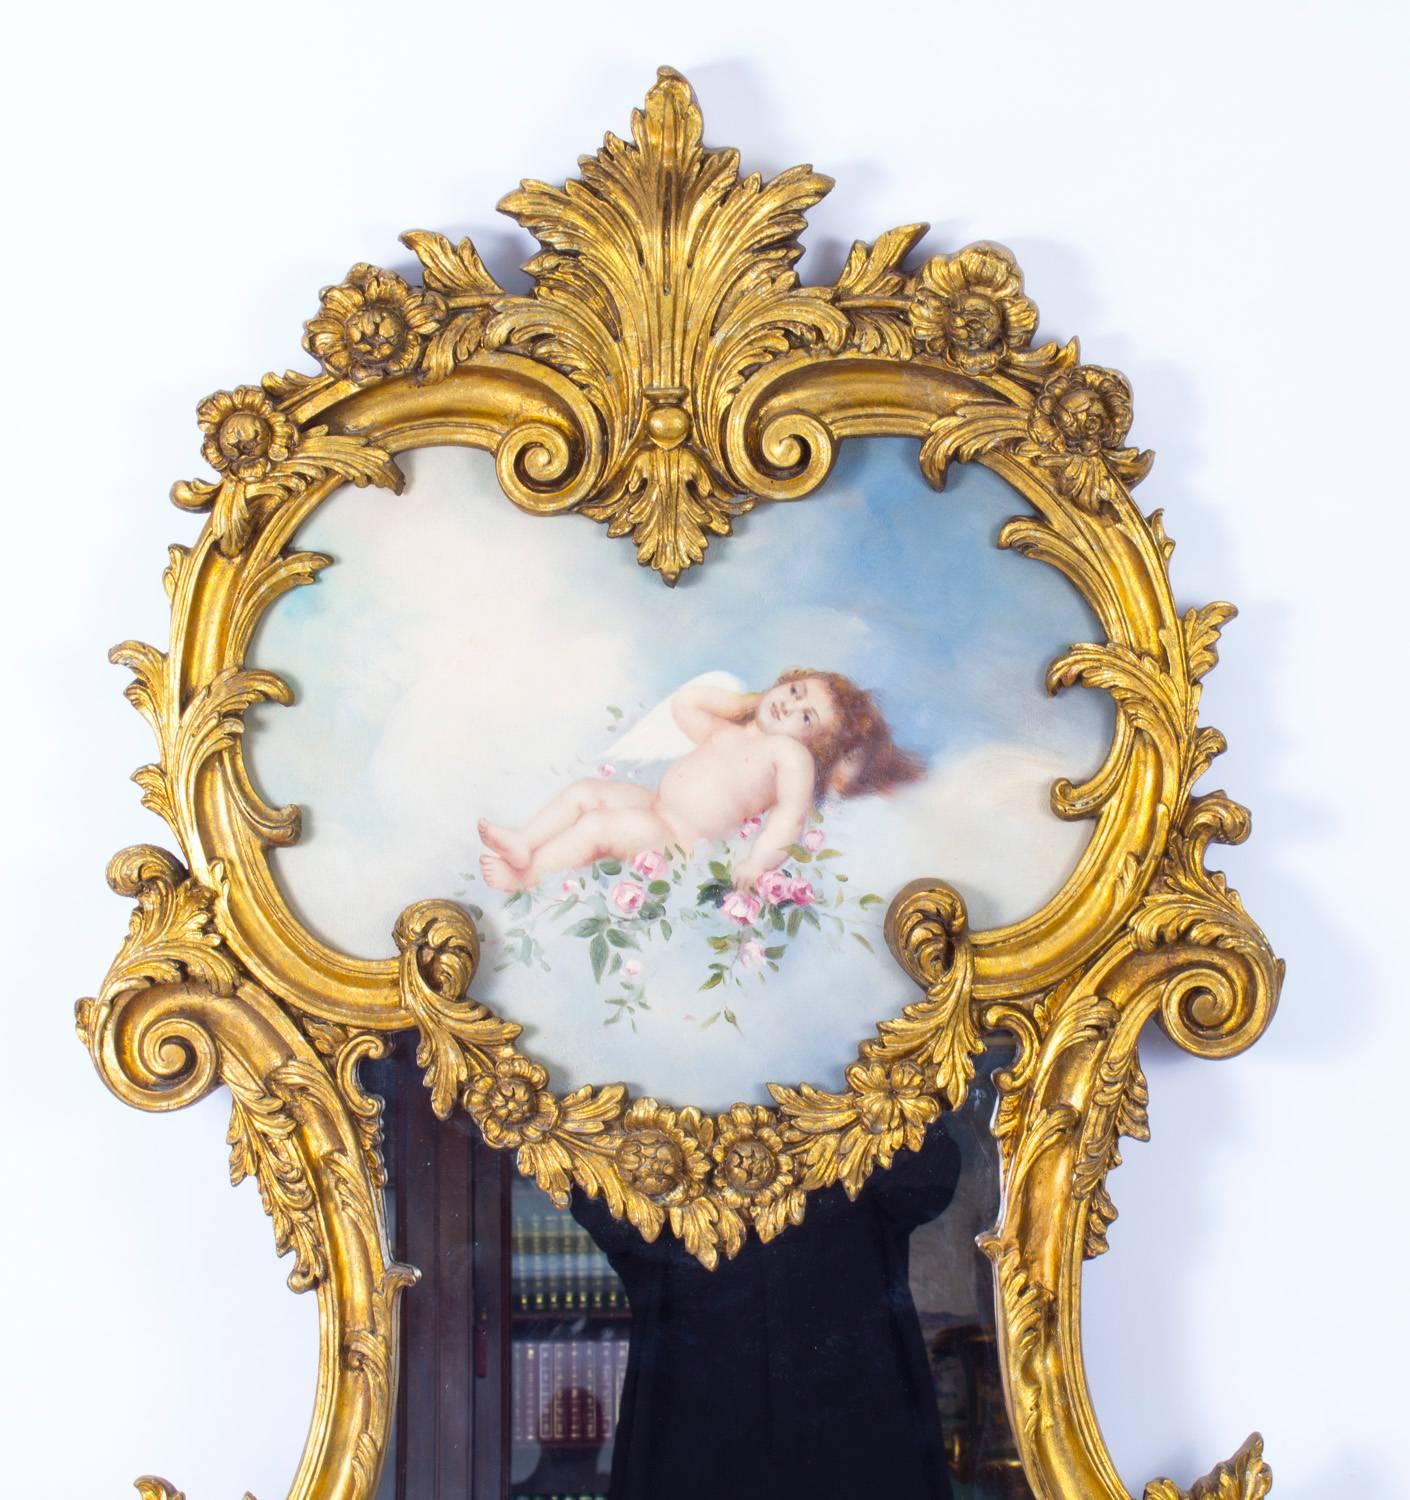 This is a beautiful and highly decorative Italian gilt mirror with a stunning hand-painted plaque depicting a cherub resting on a cloud, dating from the last quarter of the 20th century.

The quality and craftsmanship of this stunning piece are